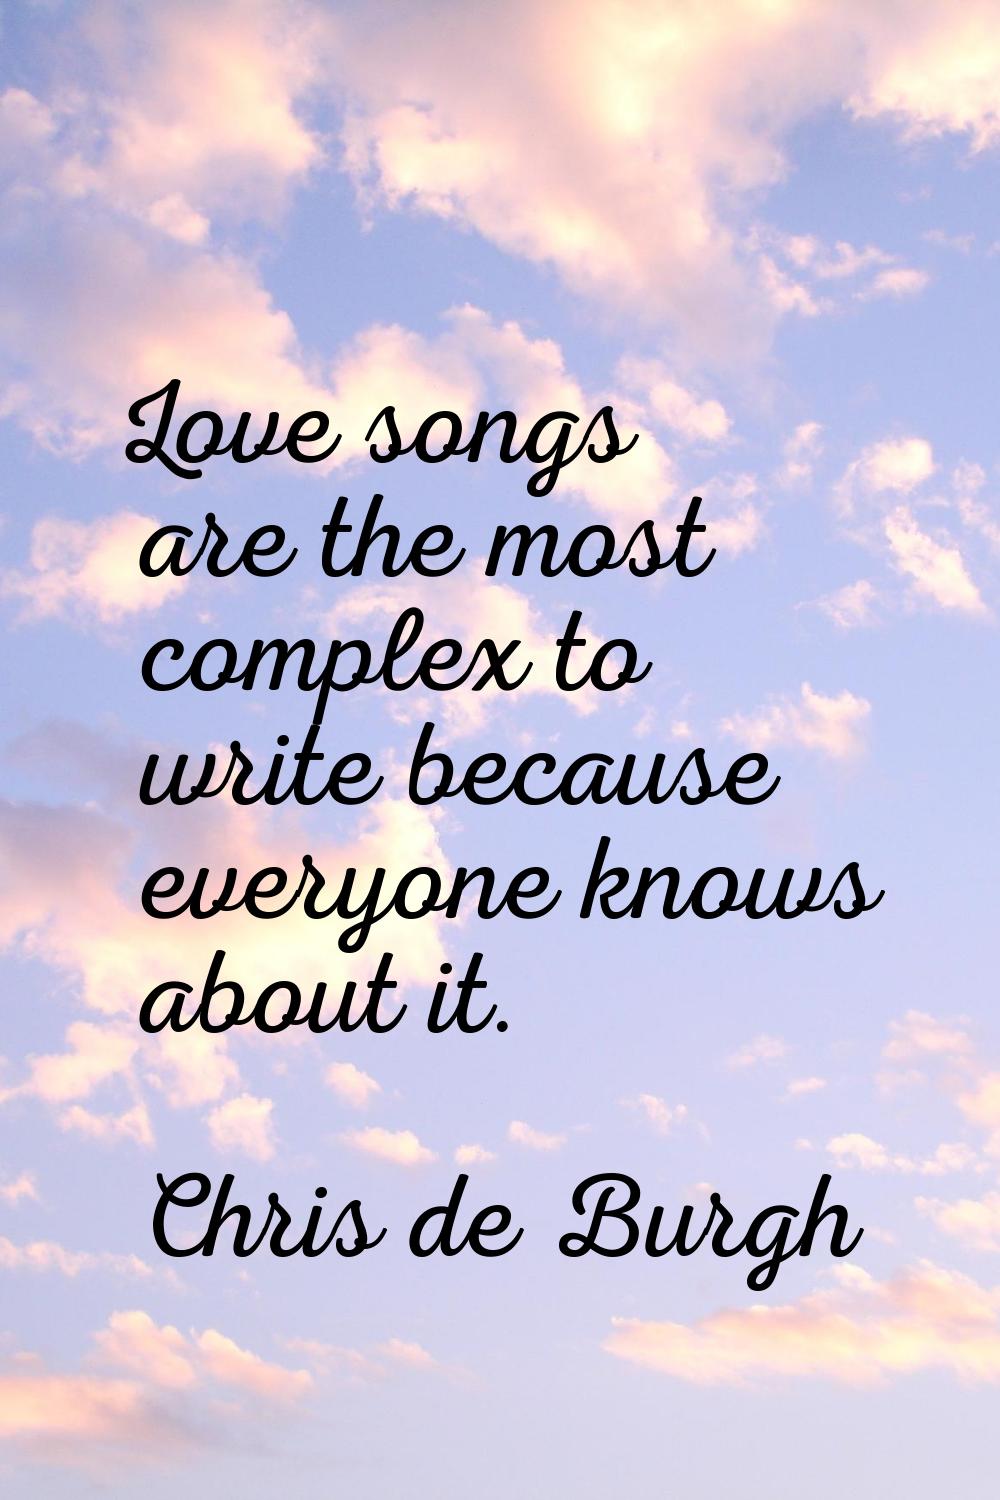 Love songs are the most complex to write because everyone knows about it.